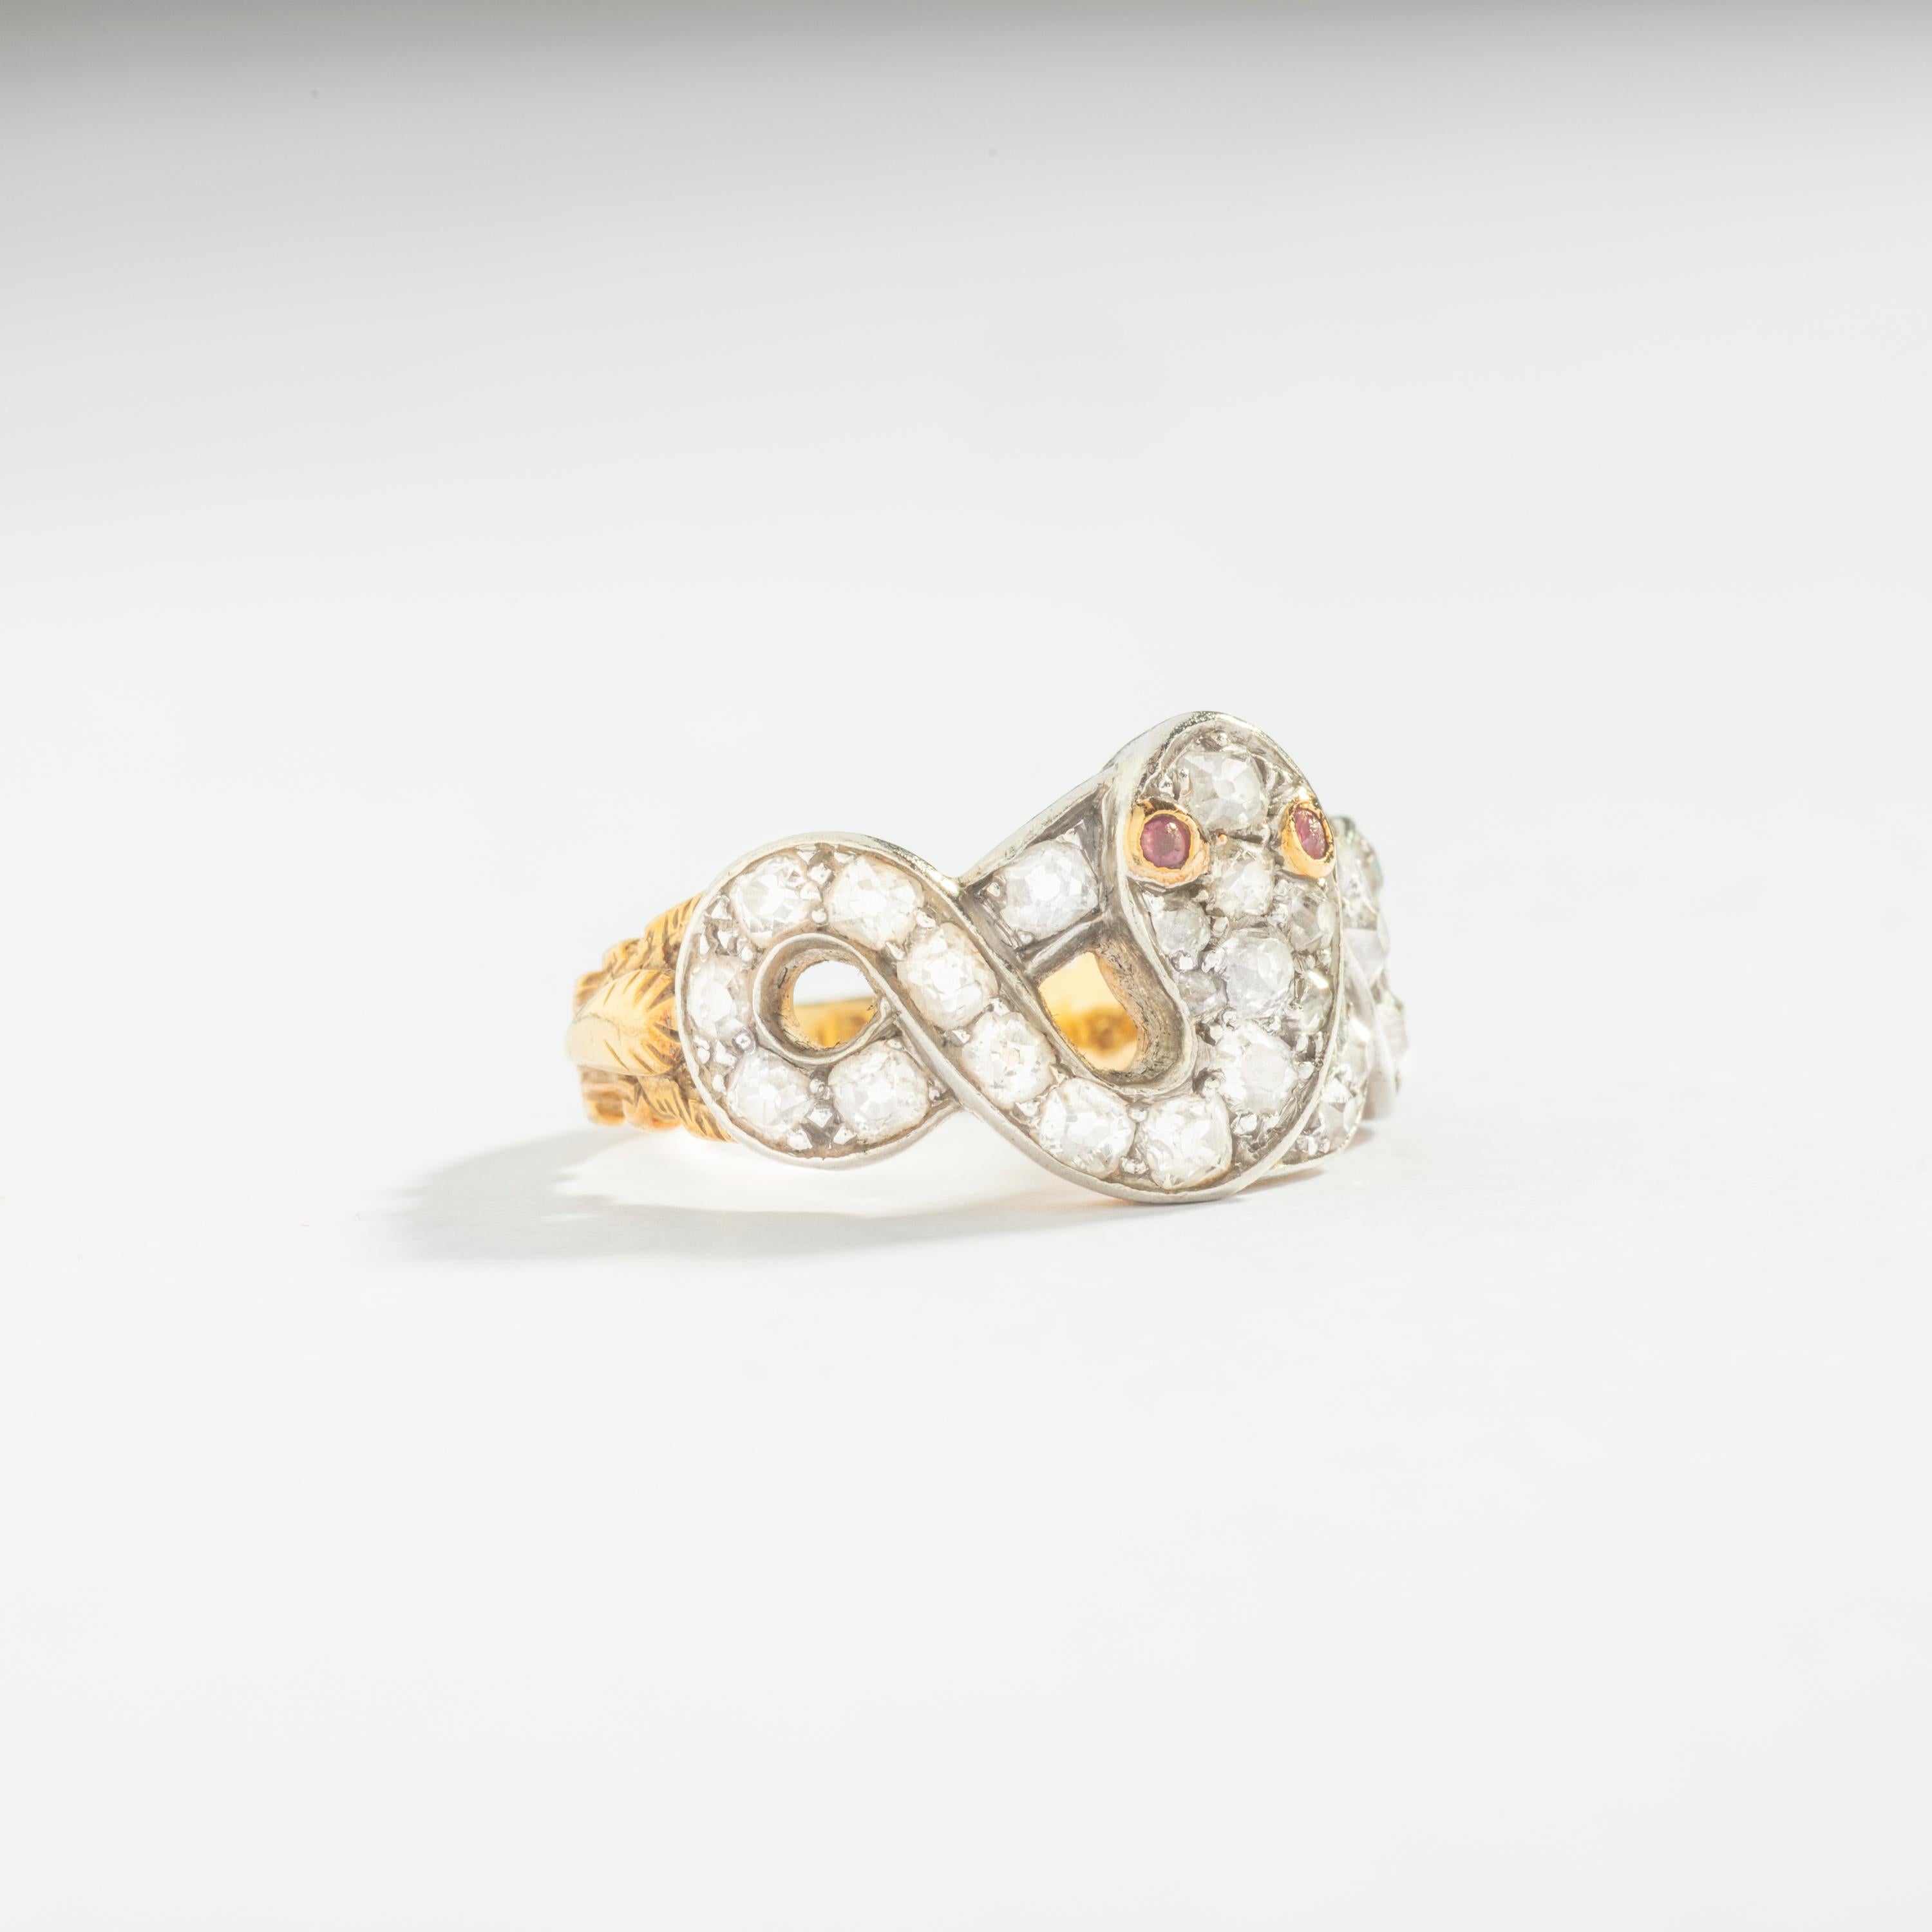 Mid-20th Century 
Snake Diamond with Ruby eyes on Platinum and Yellow Gold 18k Ring.

Ring size: 7.